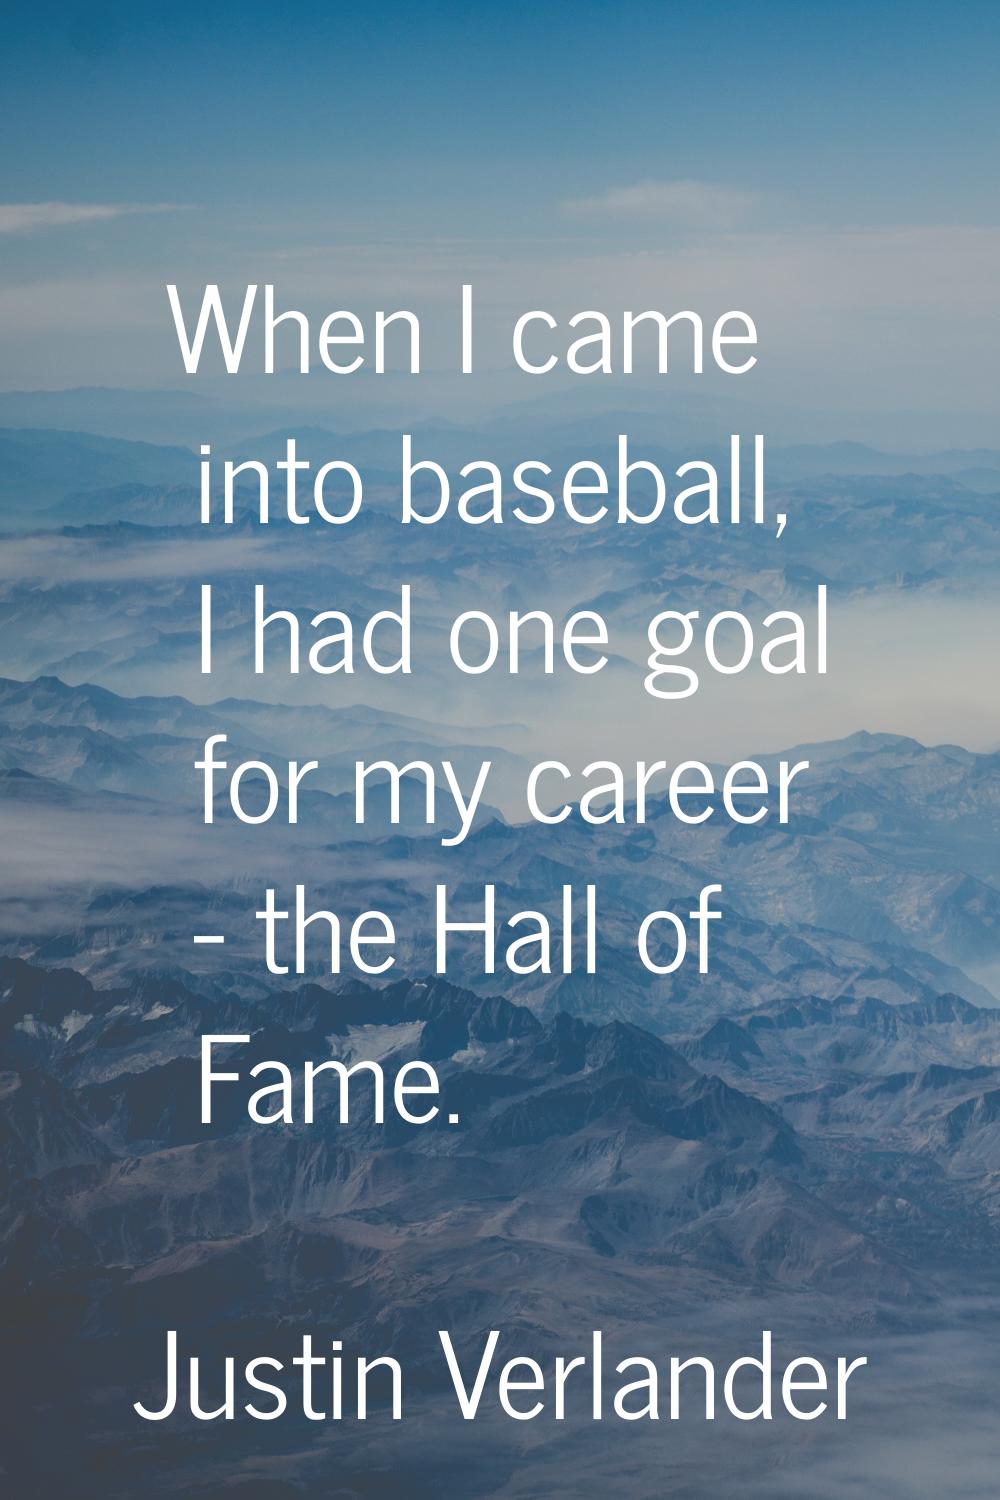 When I came into baseball, I had one goal for my career - the Hall of Fame.